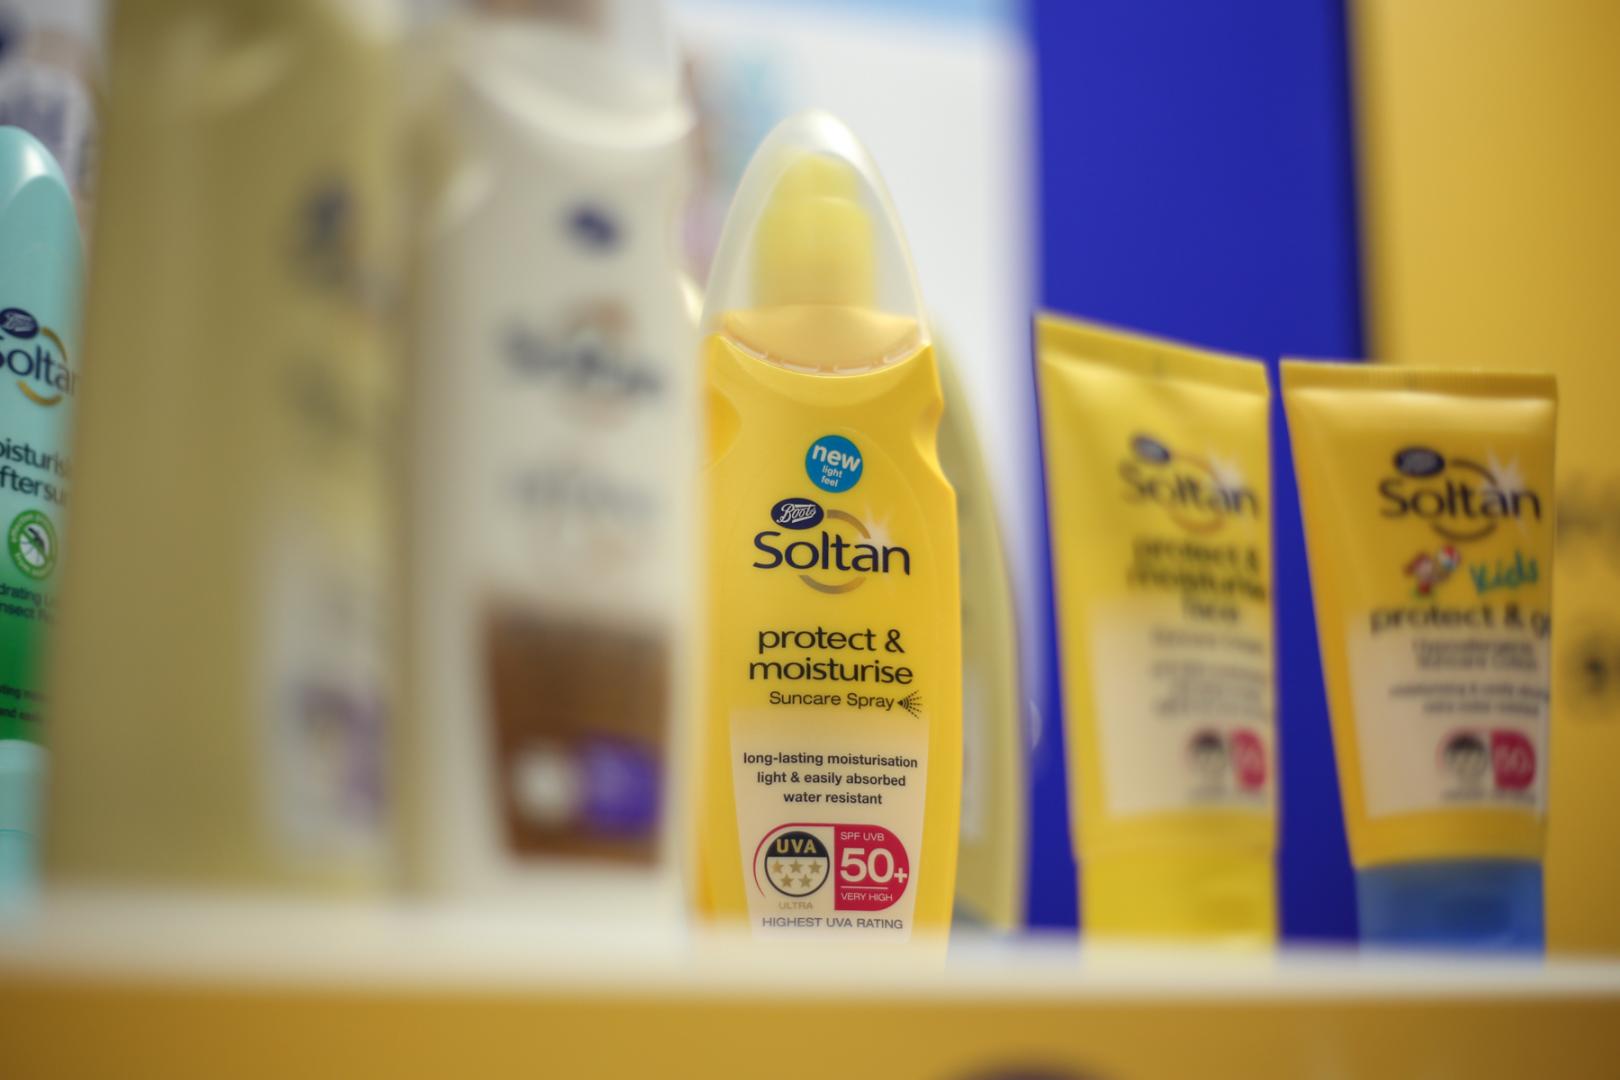 Boots Soltan suncare products